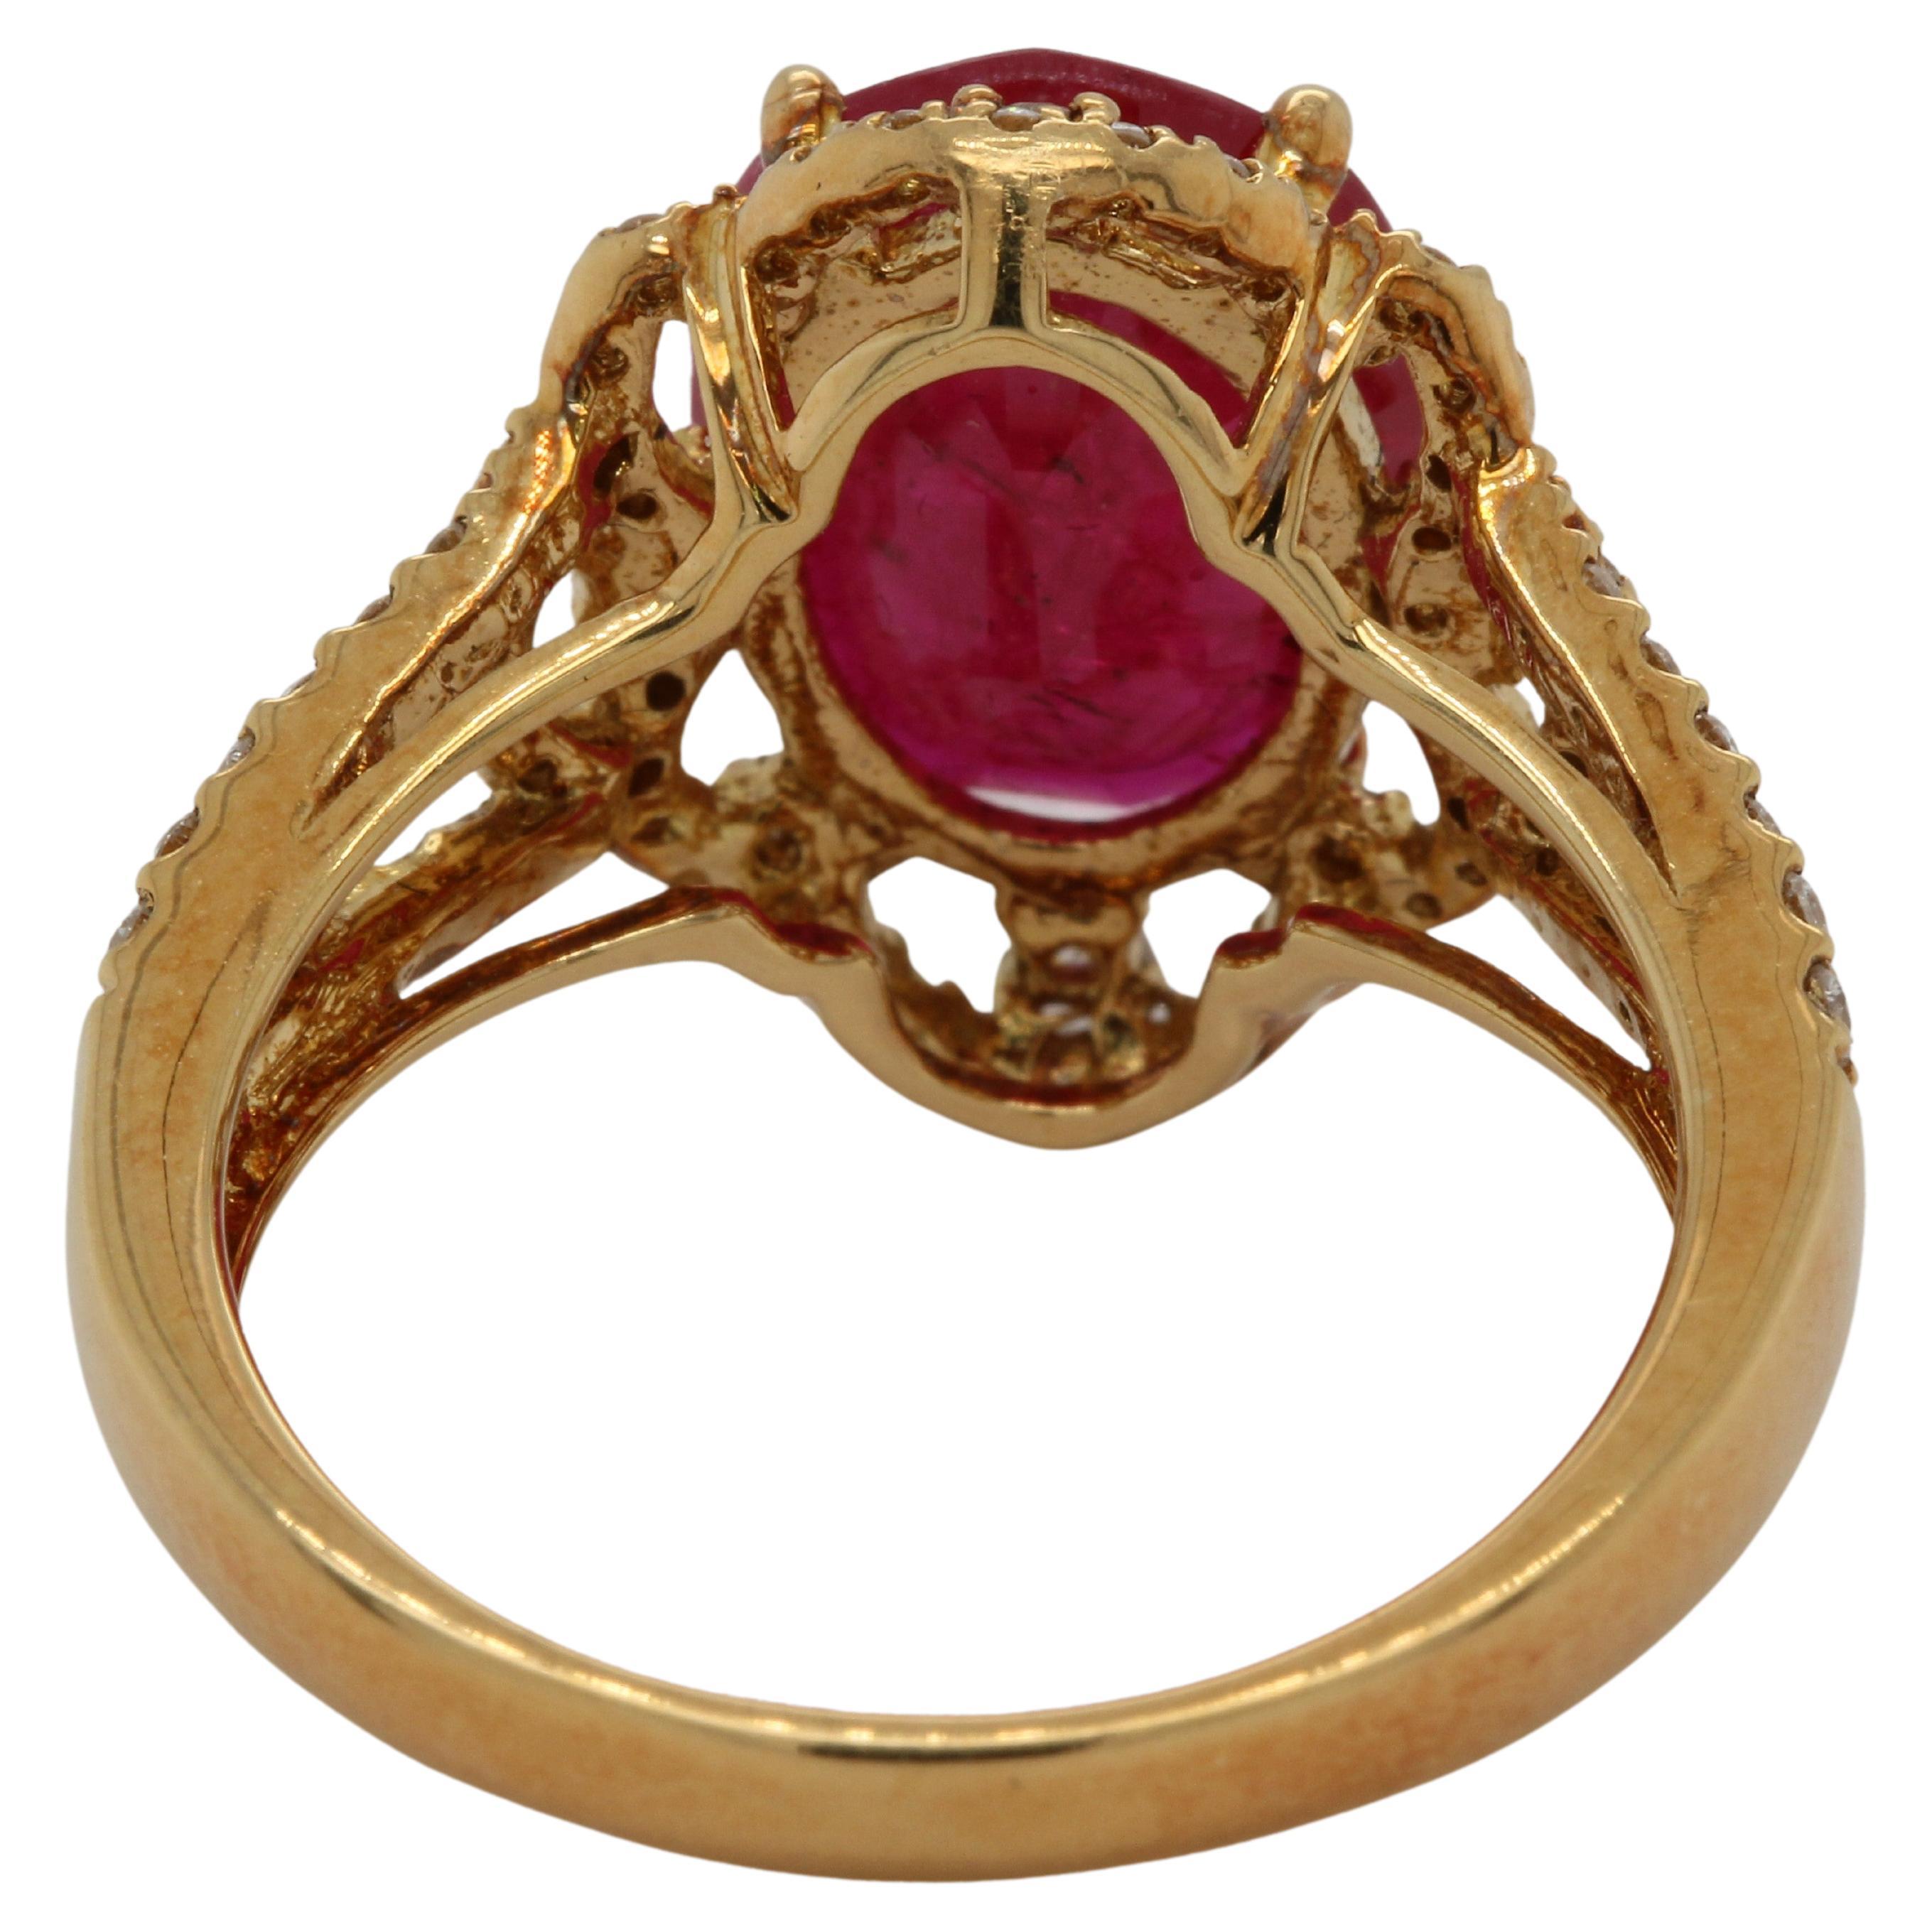 5.19 Carat Ruby And Diamond Ring In 18 Karat Gold For Sale 3